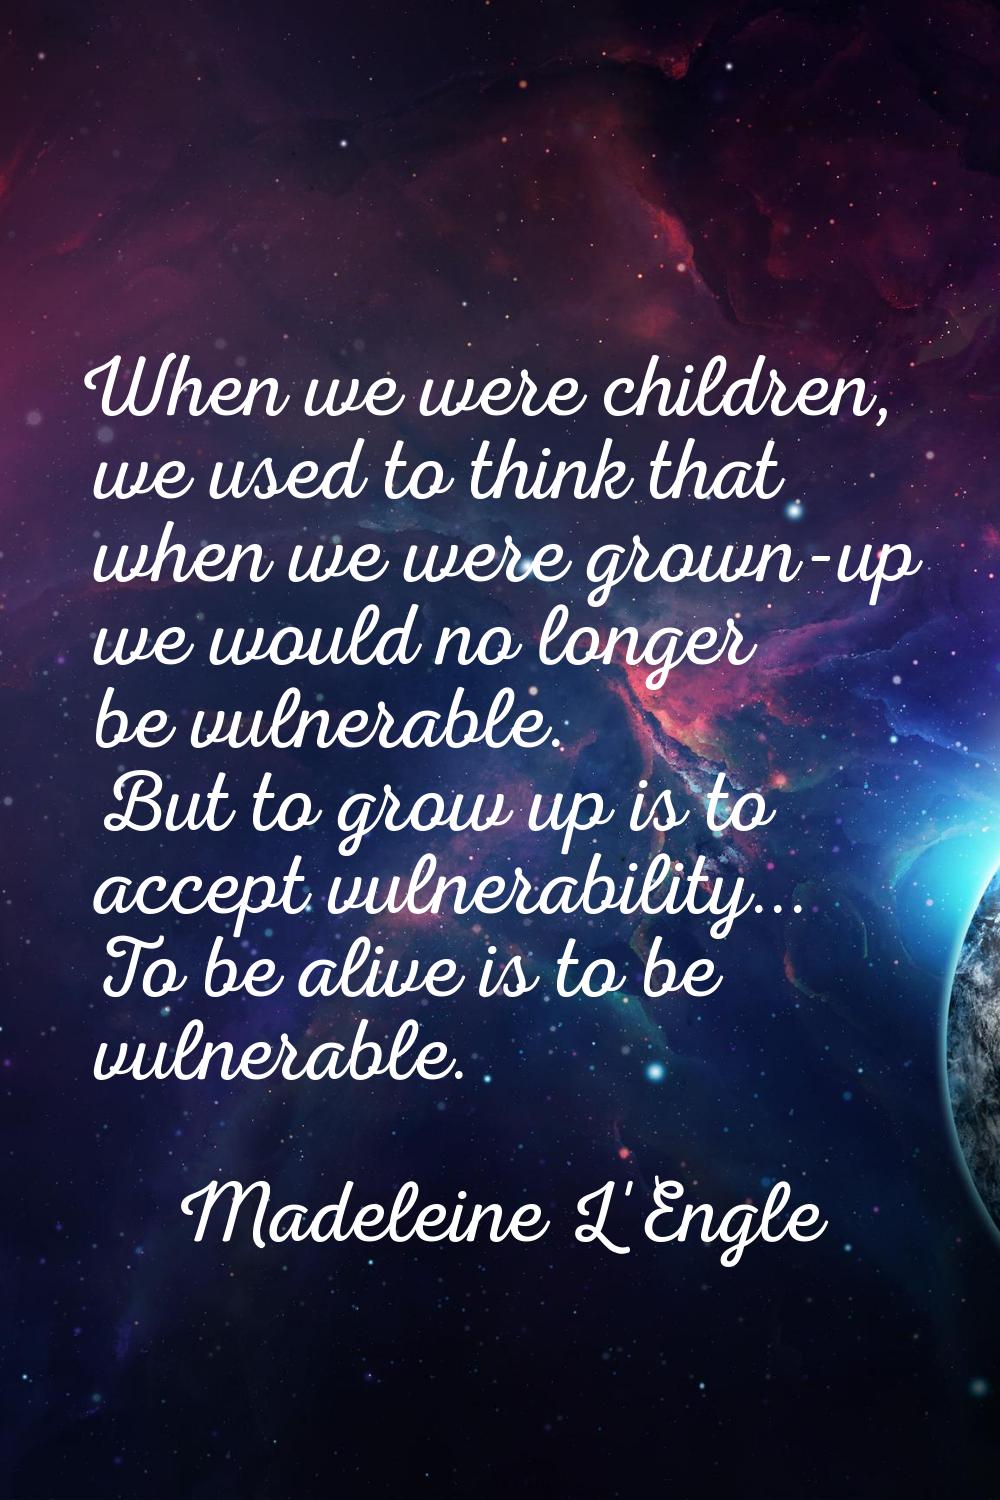 When we were children, we used to think that when we were grown-up we would no longer be vulnerable